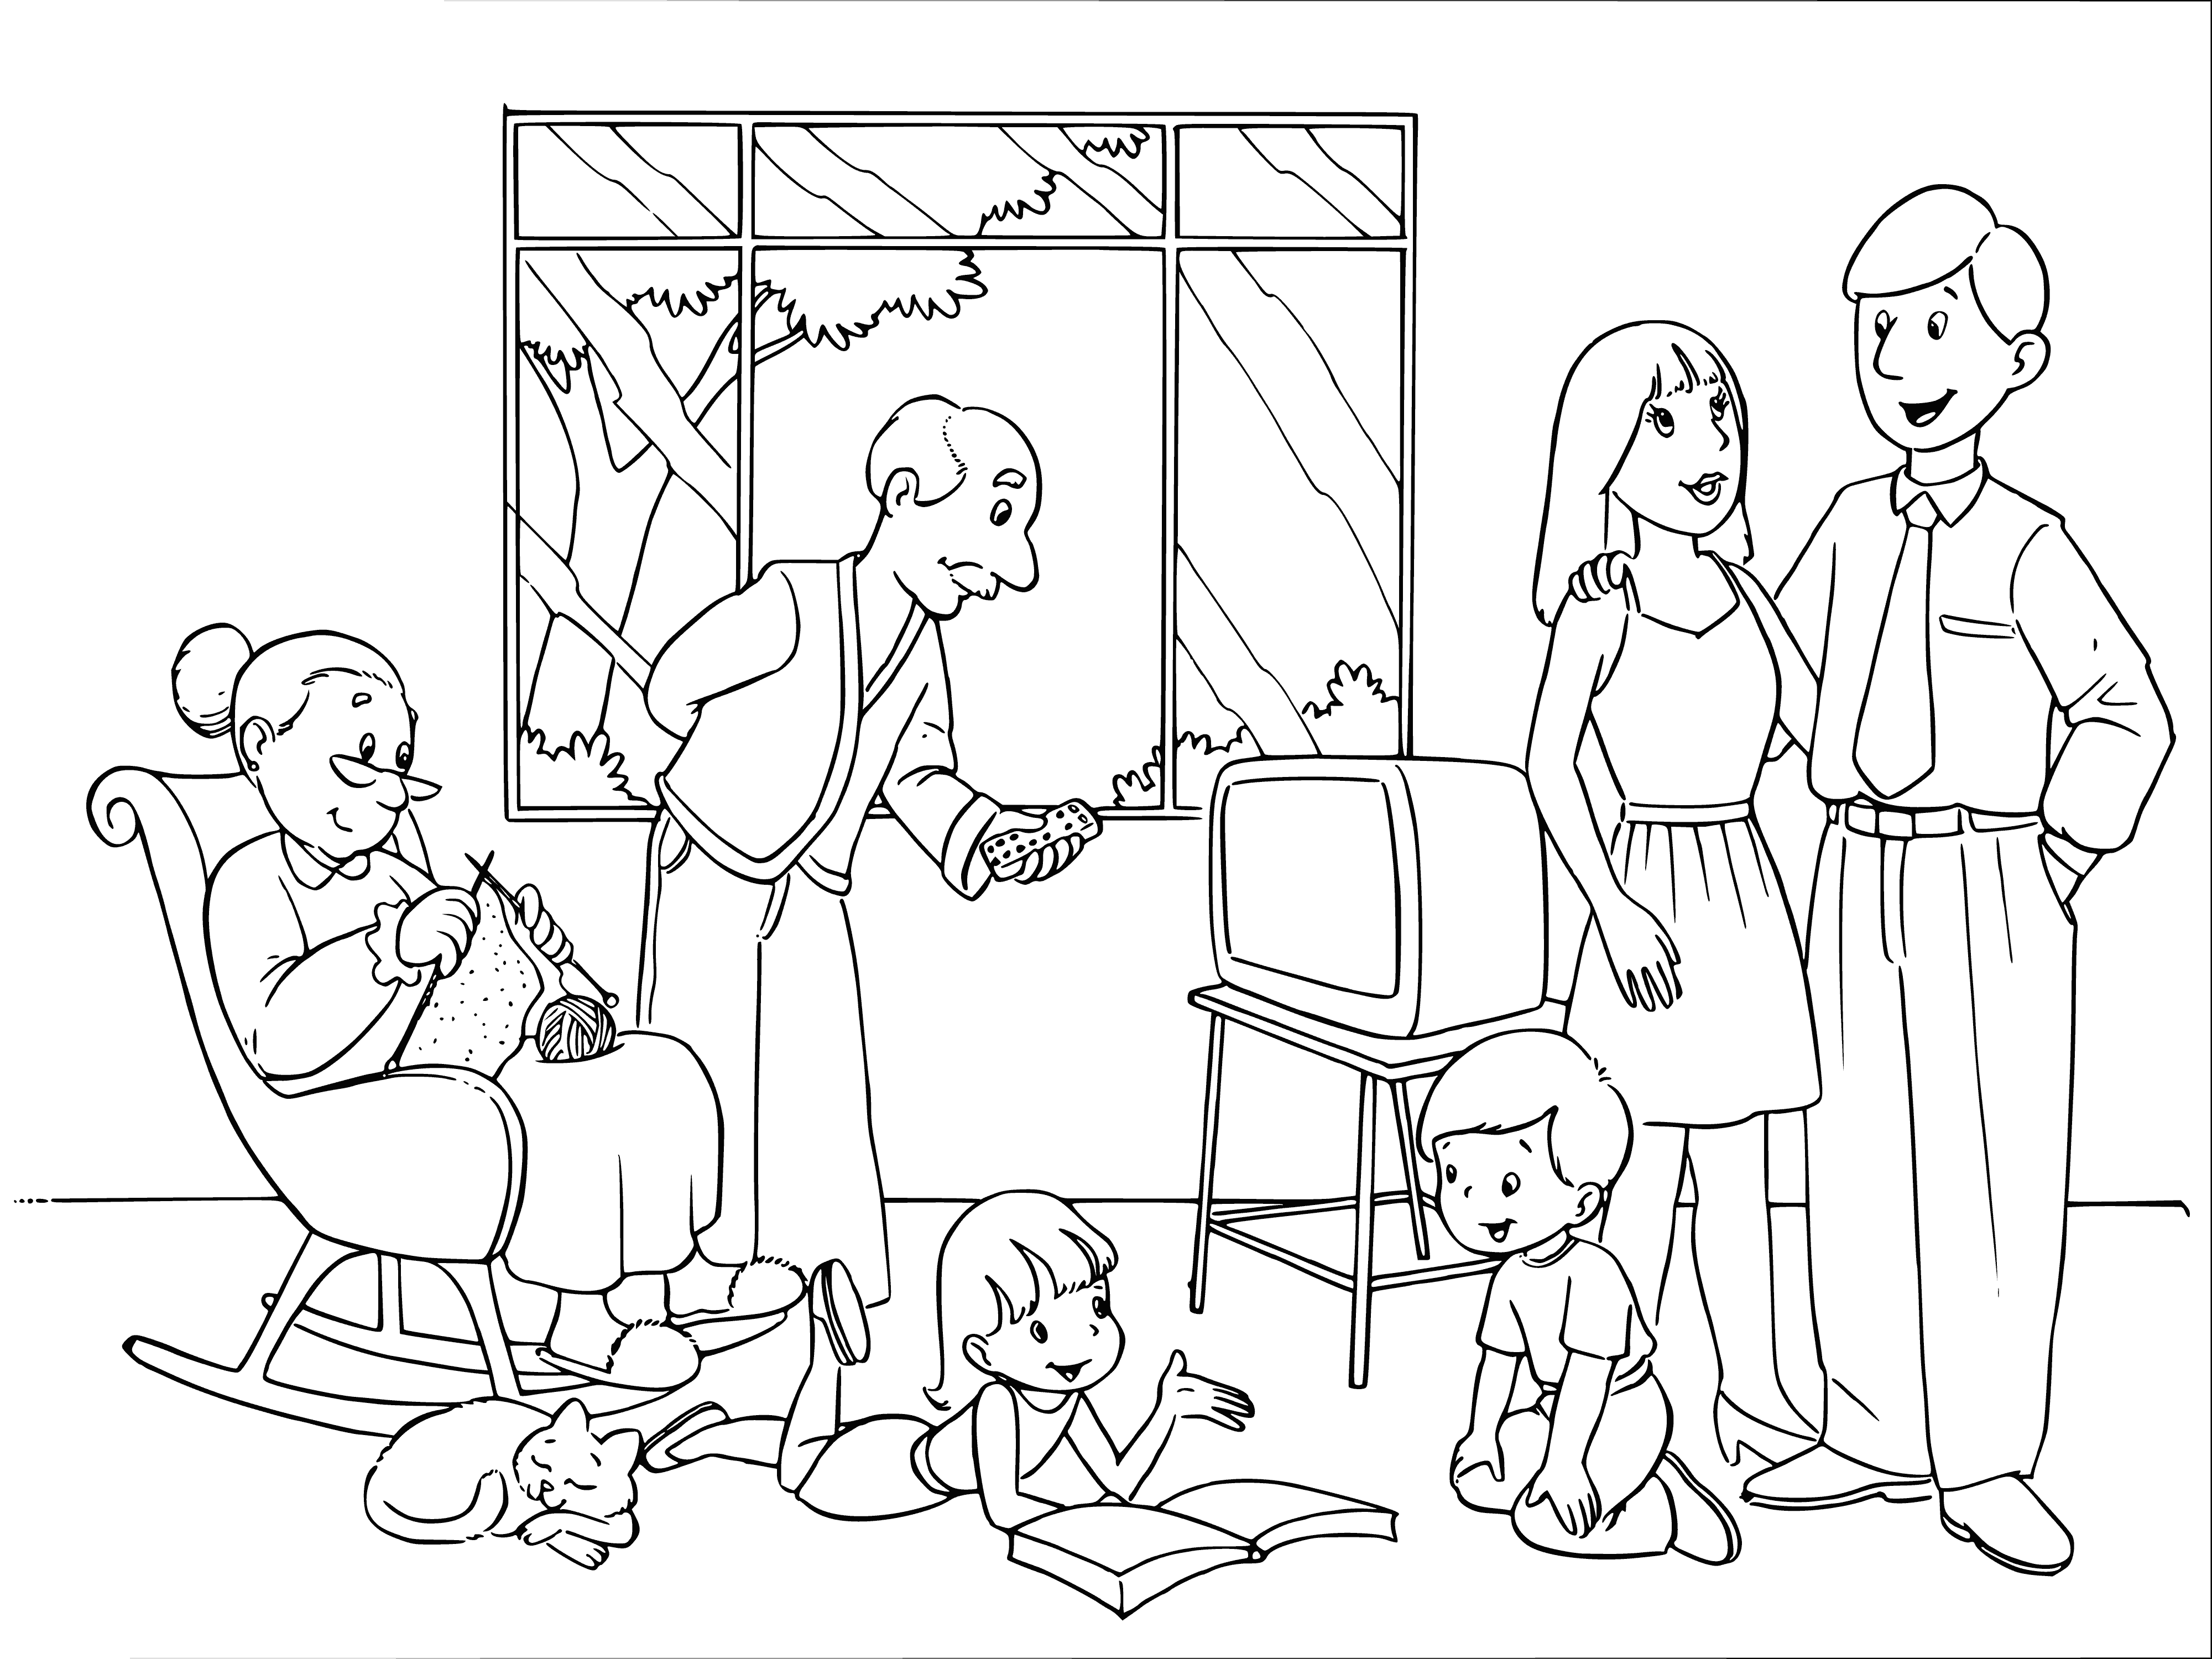 coloring page: Smiling family poses for a coloring page w/ parents standing behind their children, & trees in green background.